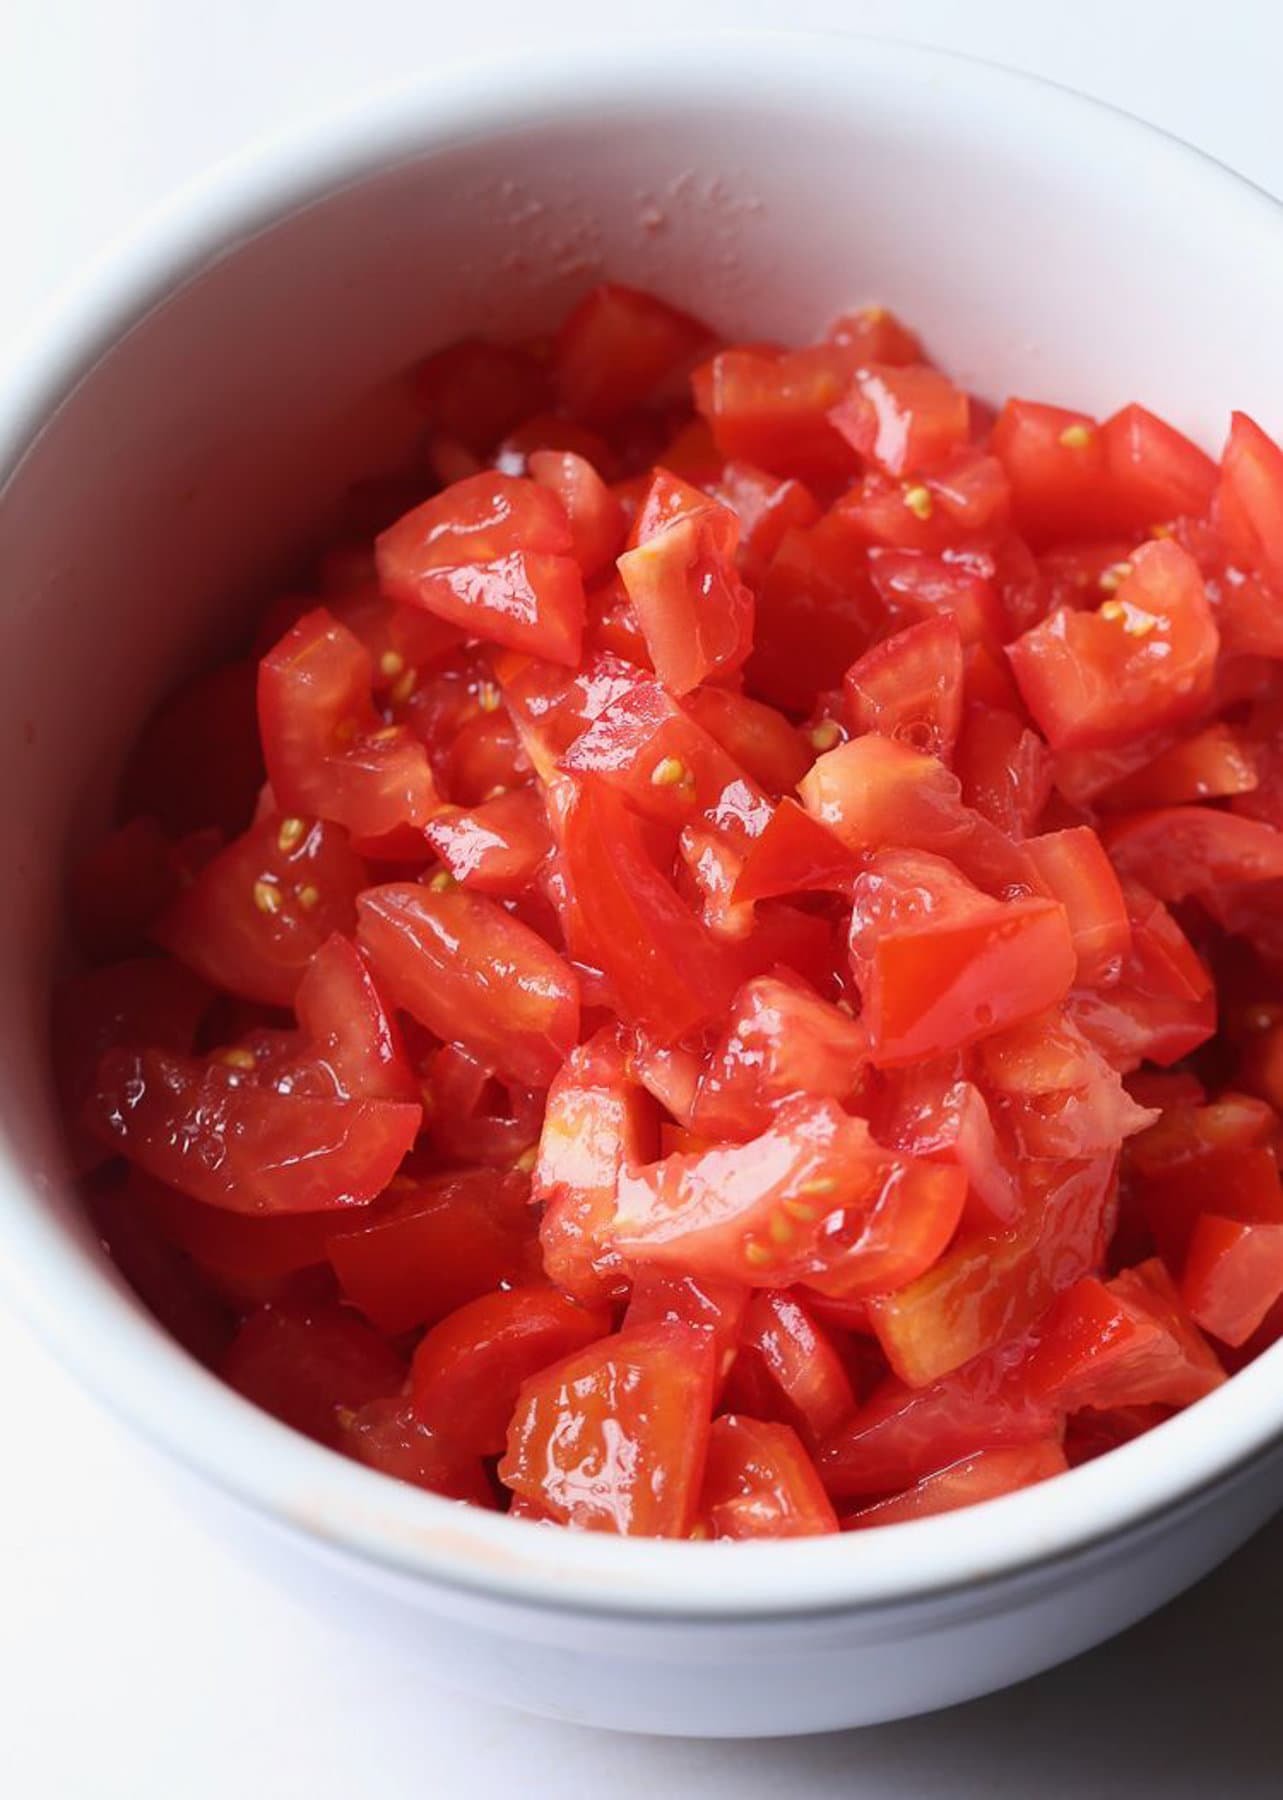 Tomatoes diced in a bowl